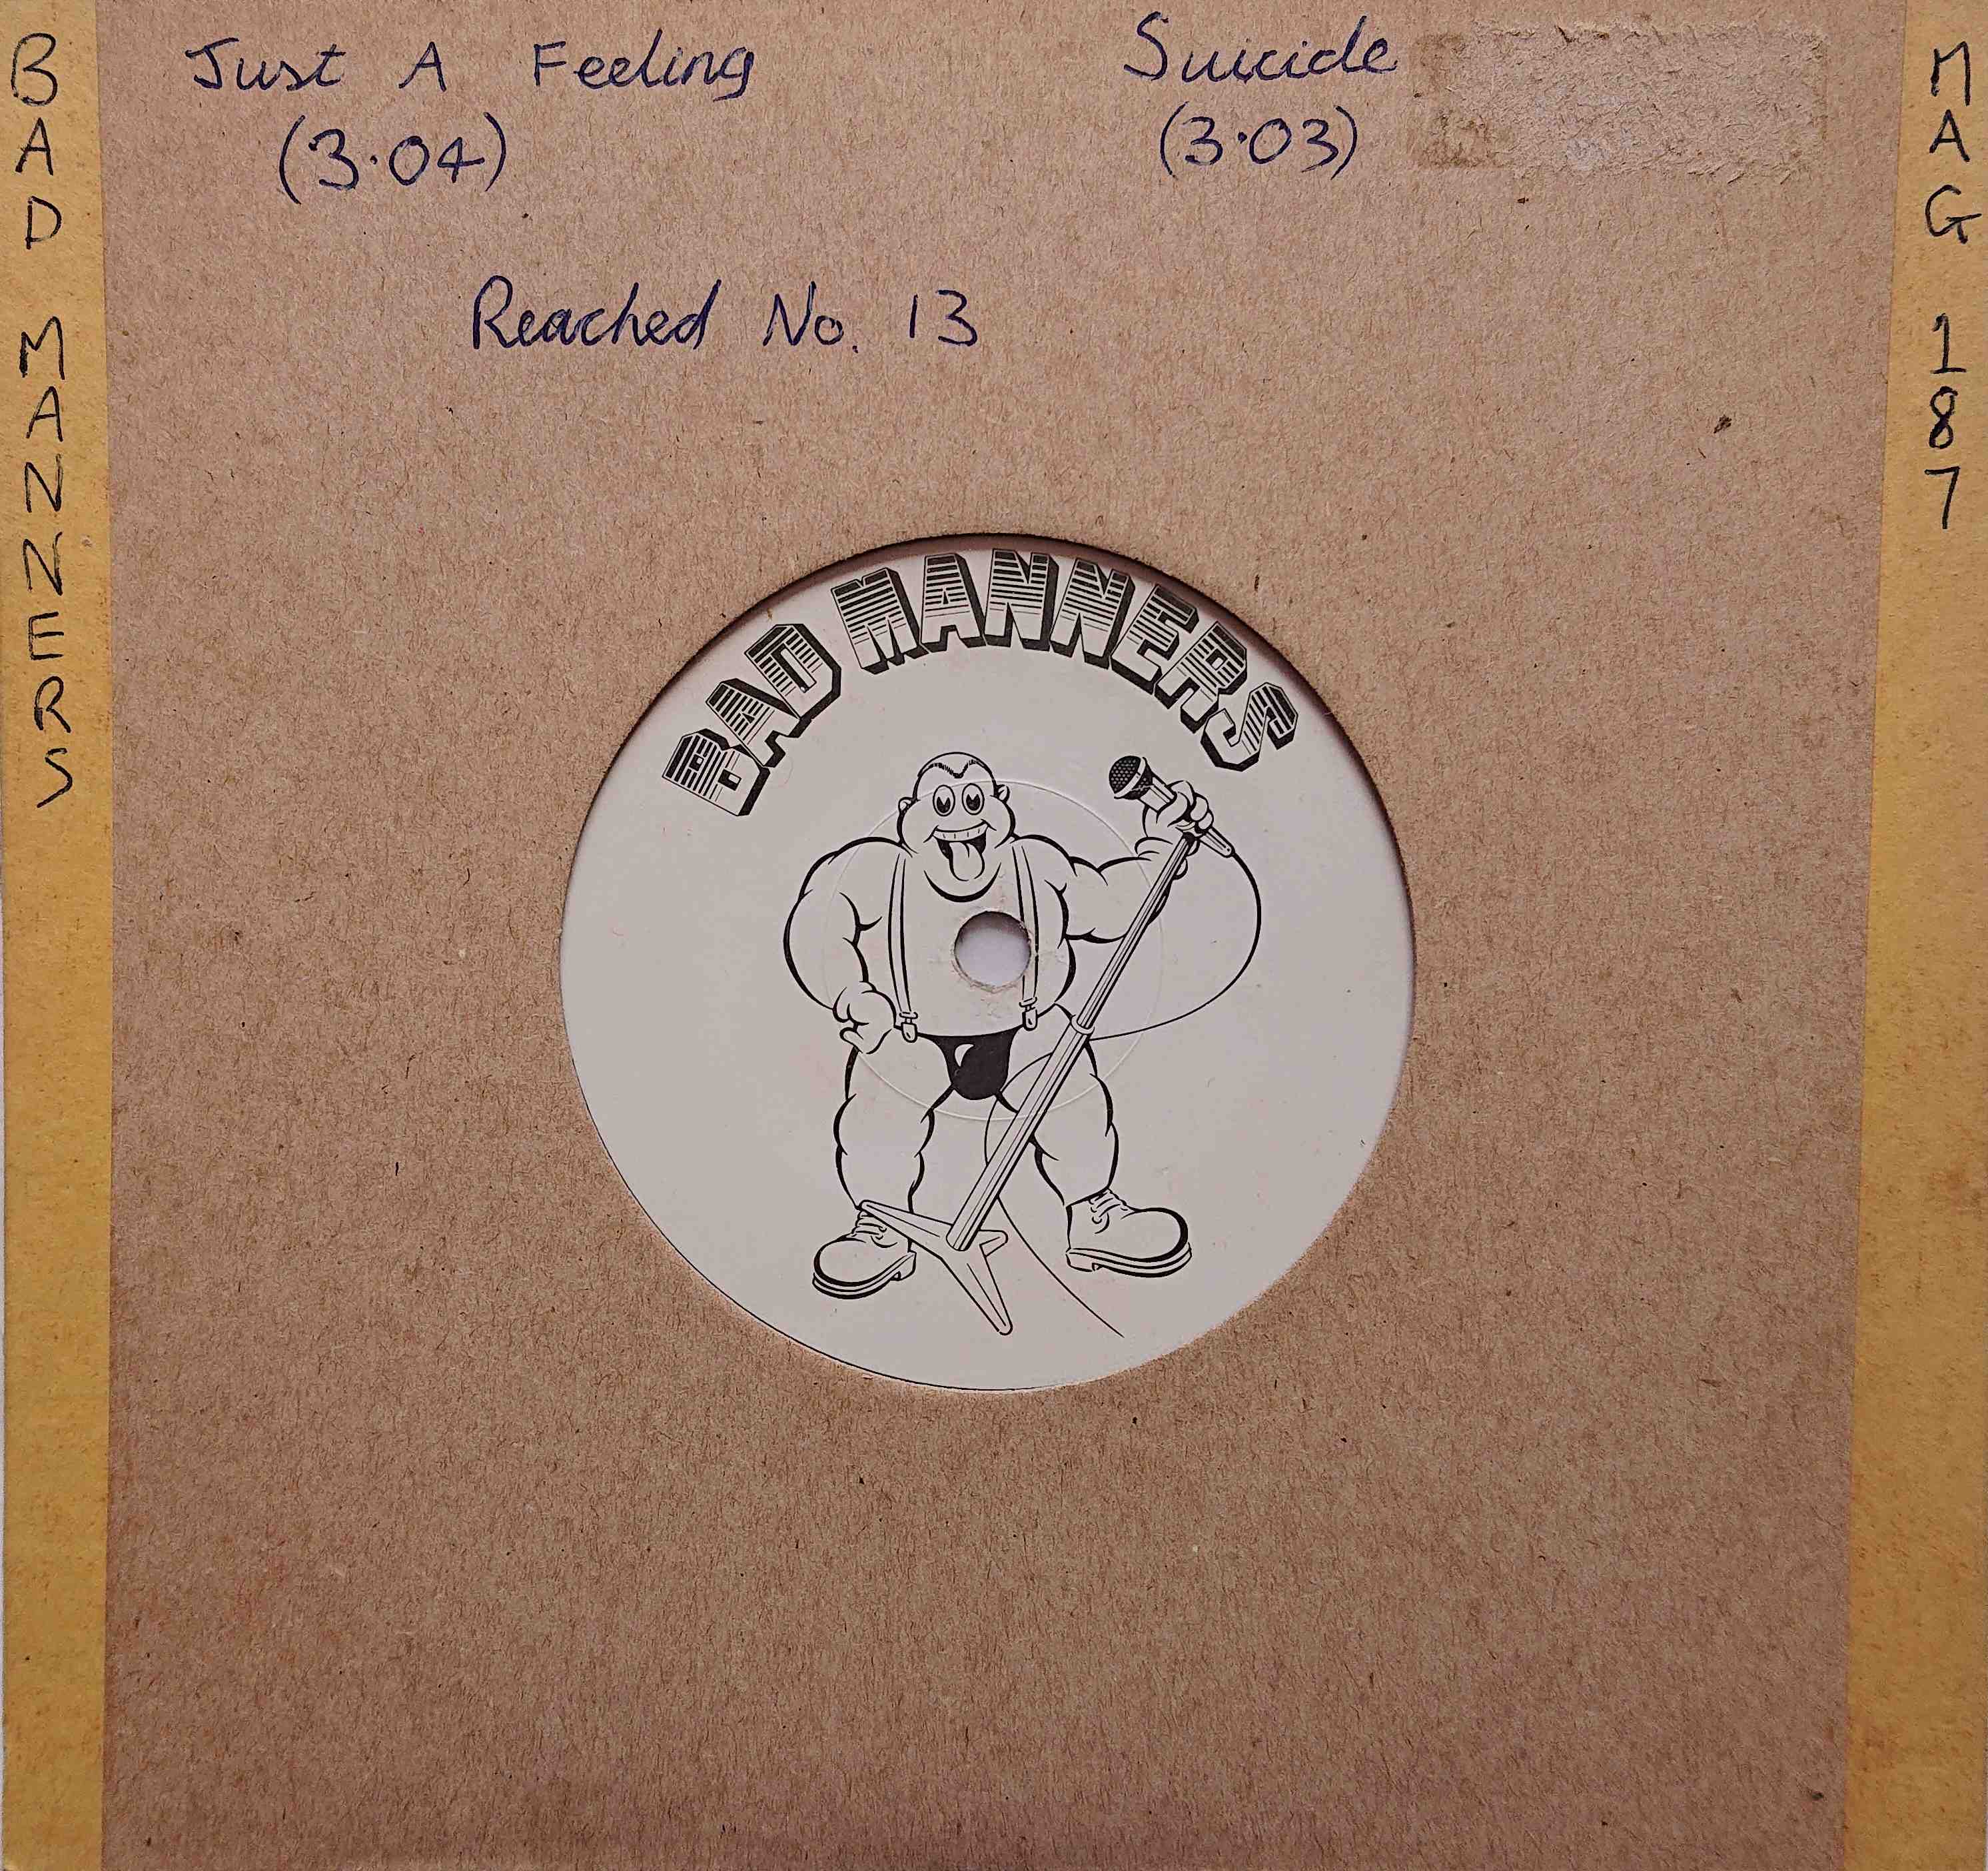 Picture of Just a feeling by artist Bad Manners 